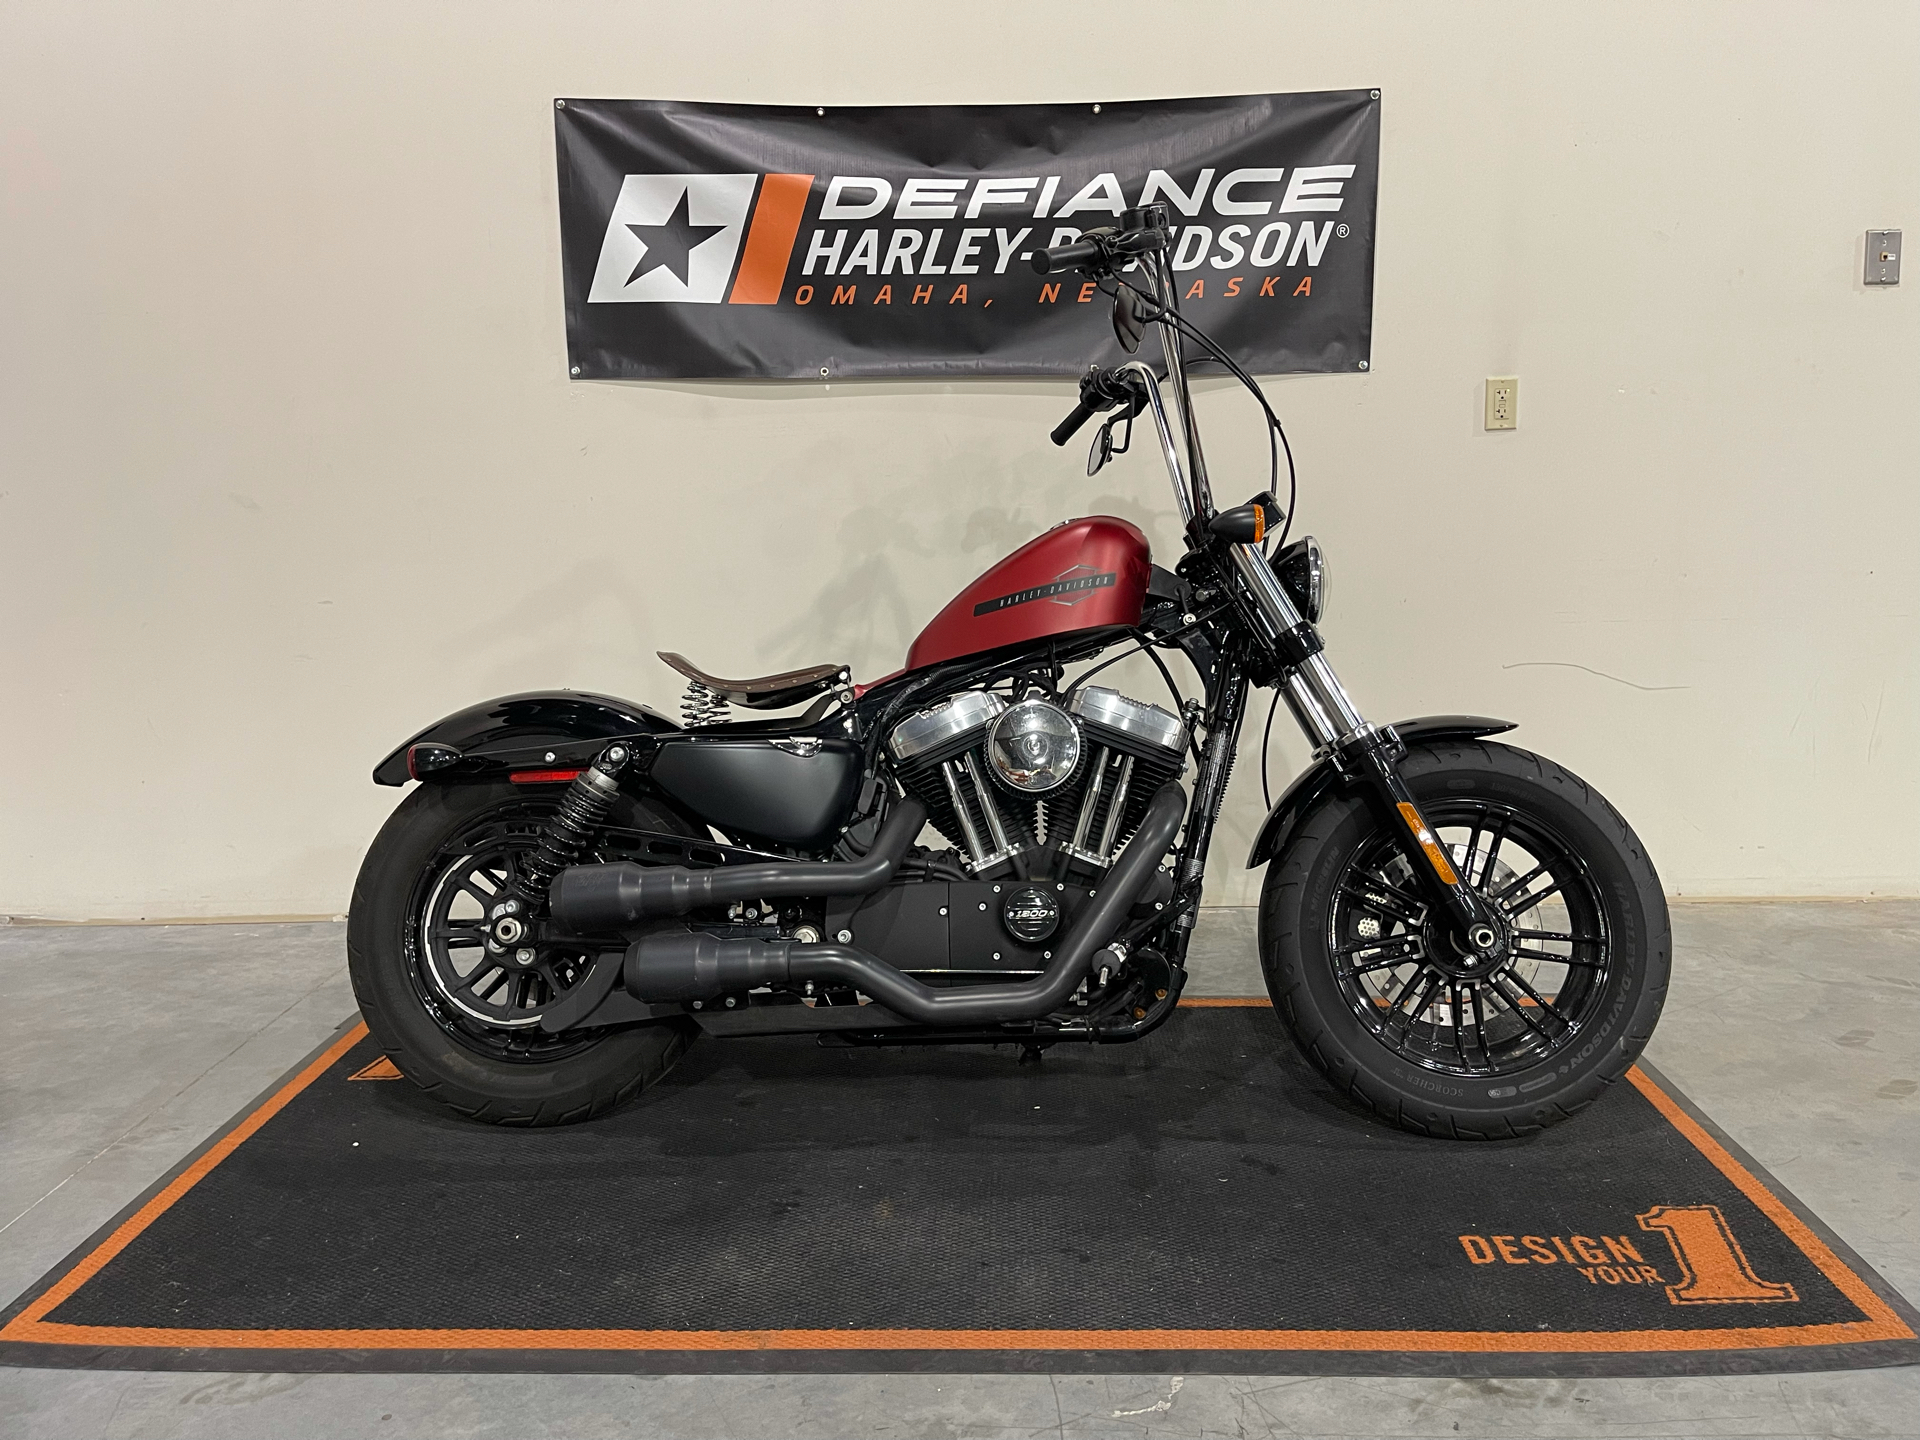 Used 2019 Harley Davidson Forty Eight Wicked Red Denim Motorcycles In Loveland Co U 11465